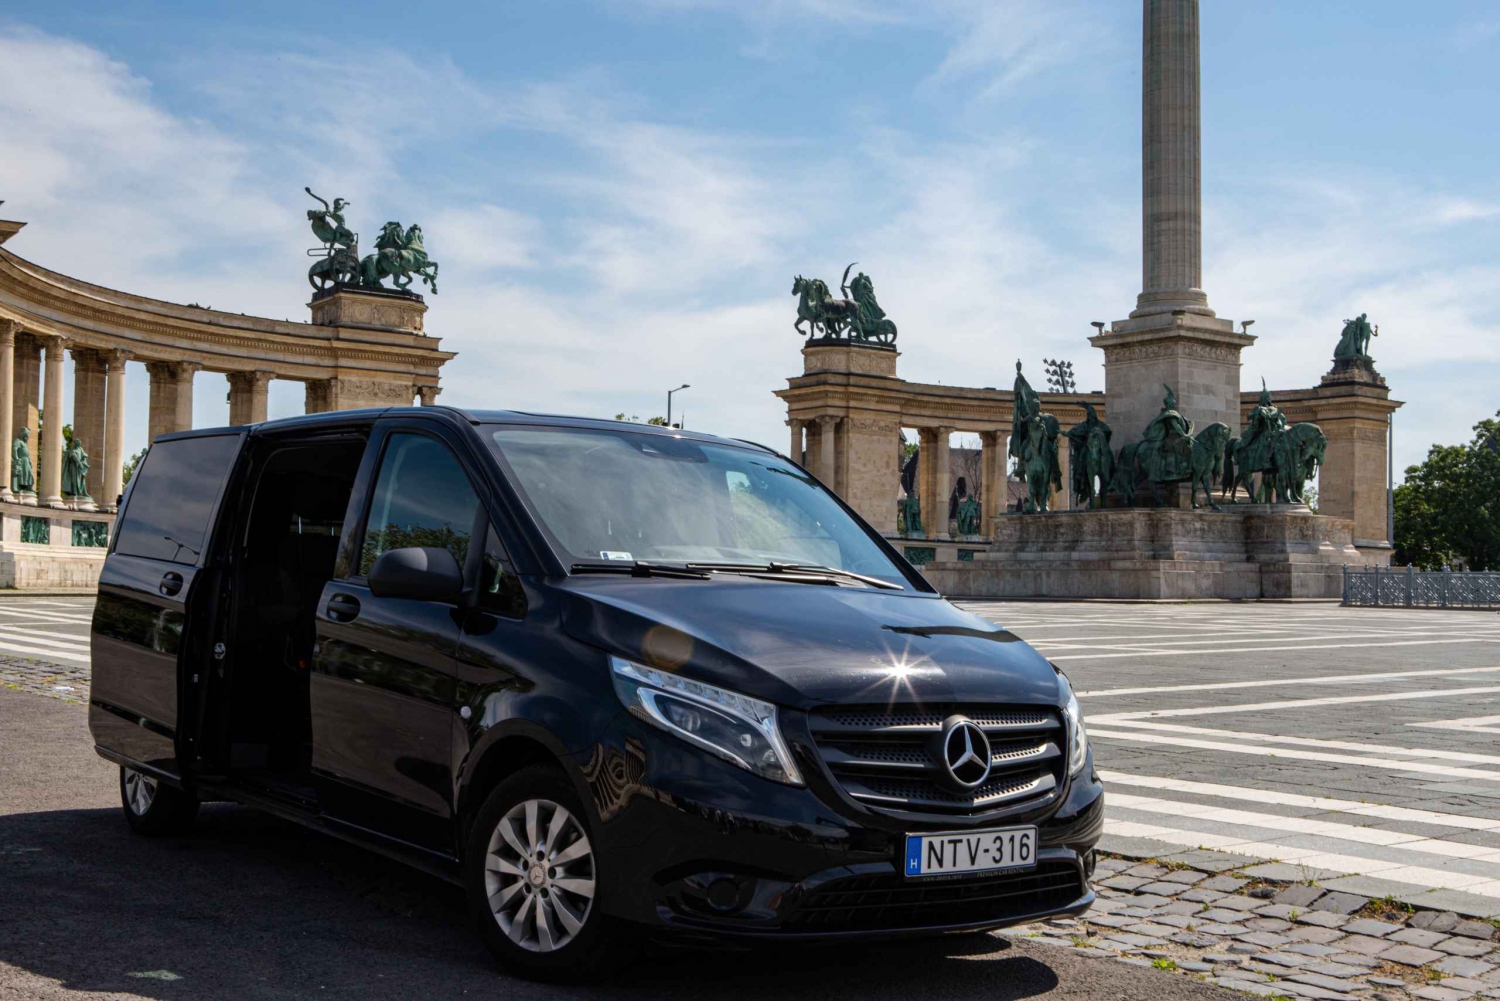 Budapest: Transfer to/from Budapest Airport